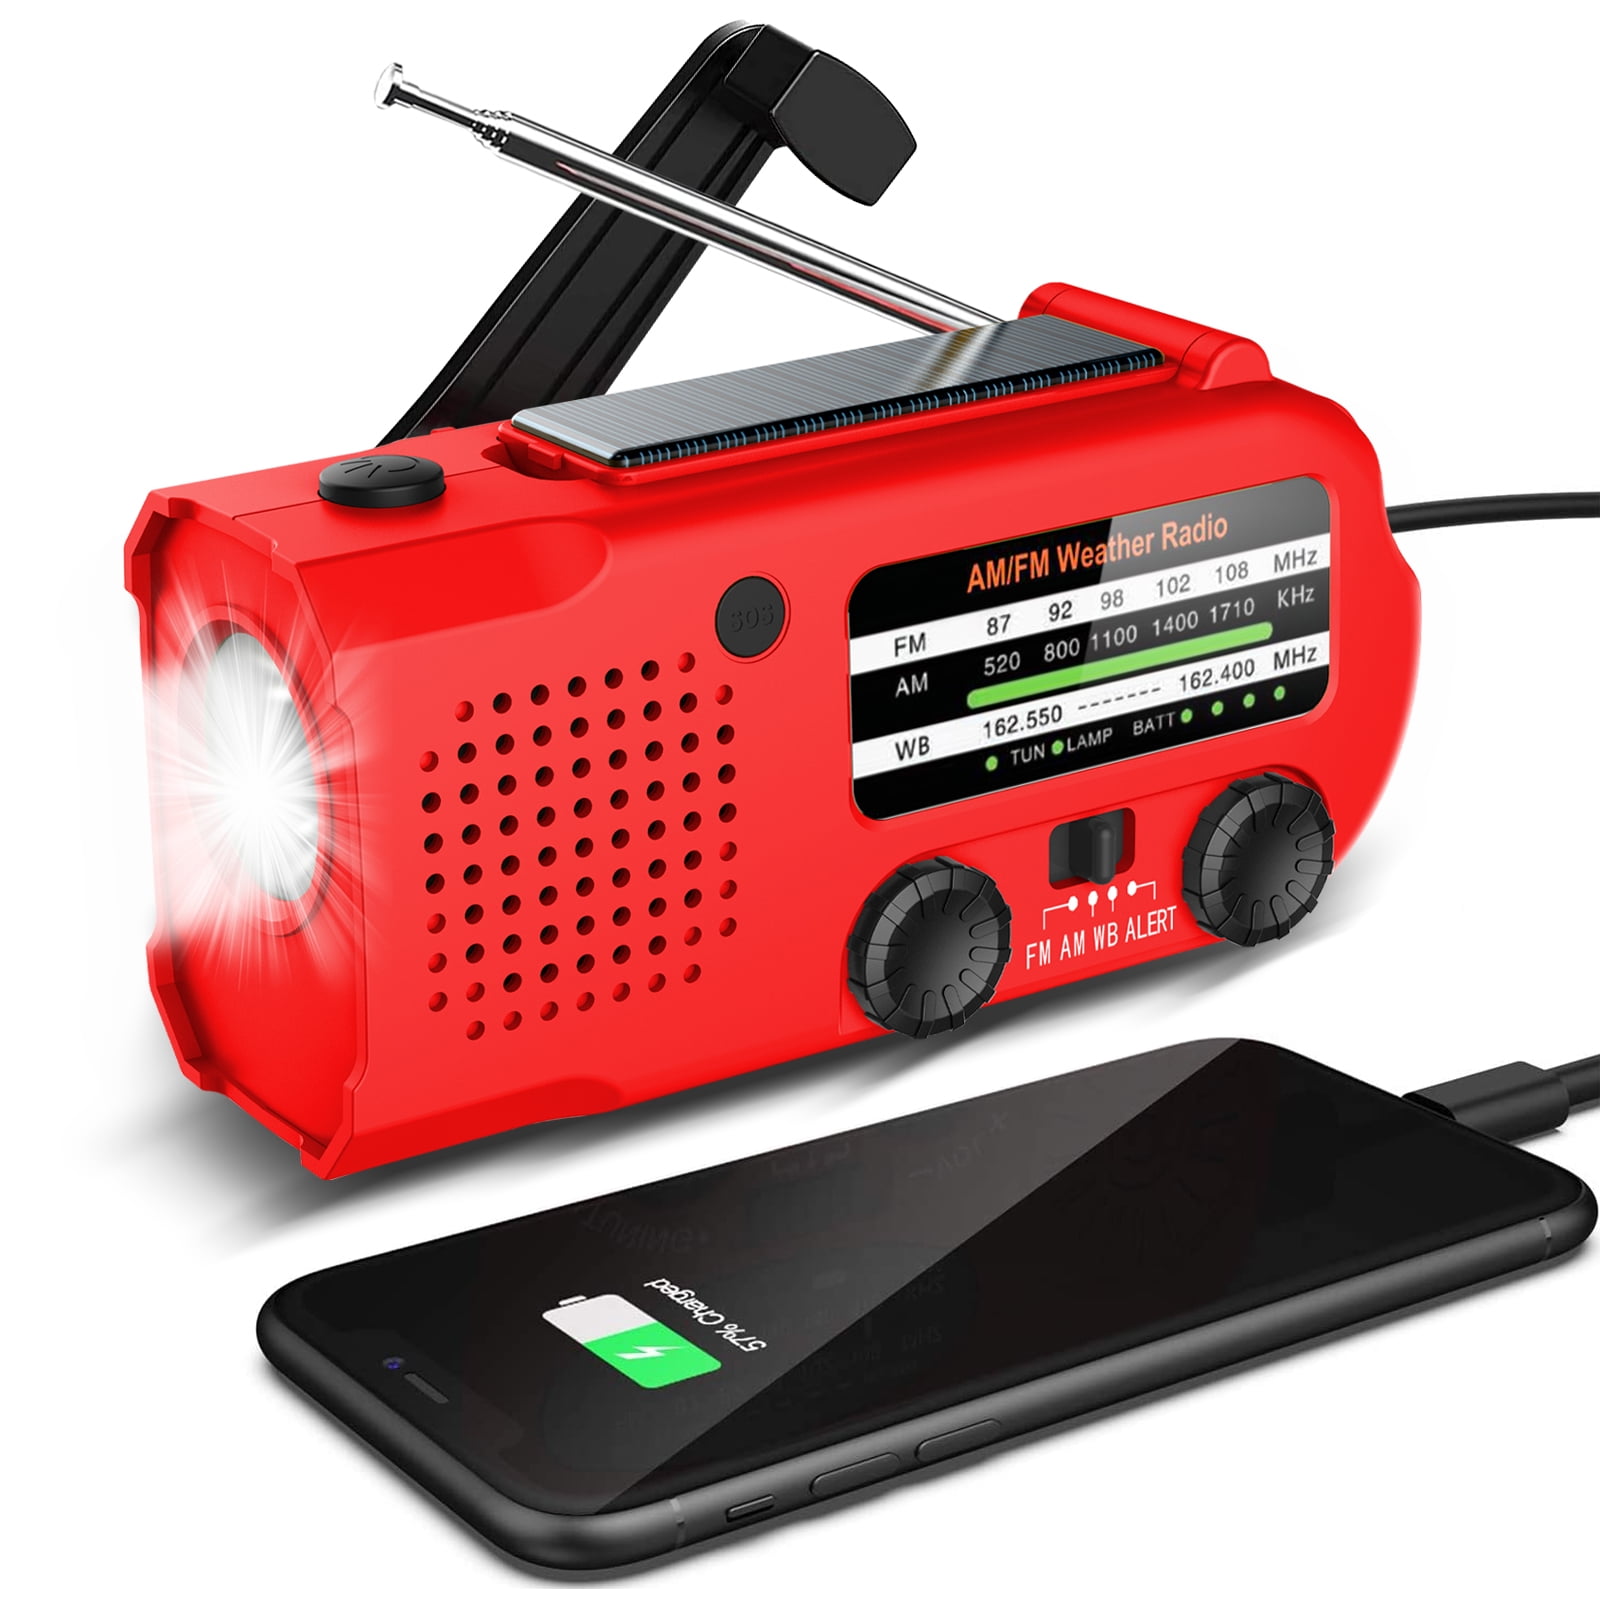 PPLEE Emergency Solar Hand Crank Radio with 5 LED Flashlight for Survival,  NOAA/AM/FM Weather Alert Radio with Reading Lamp,Battery Operated,Portable